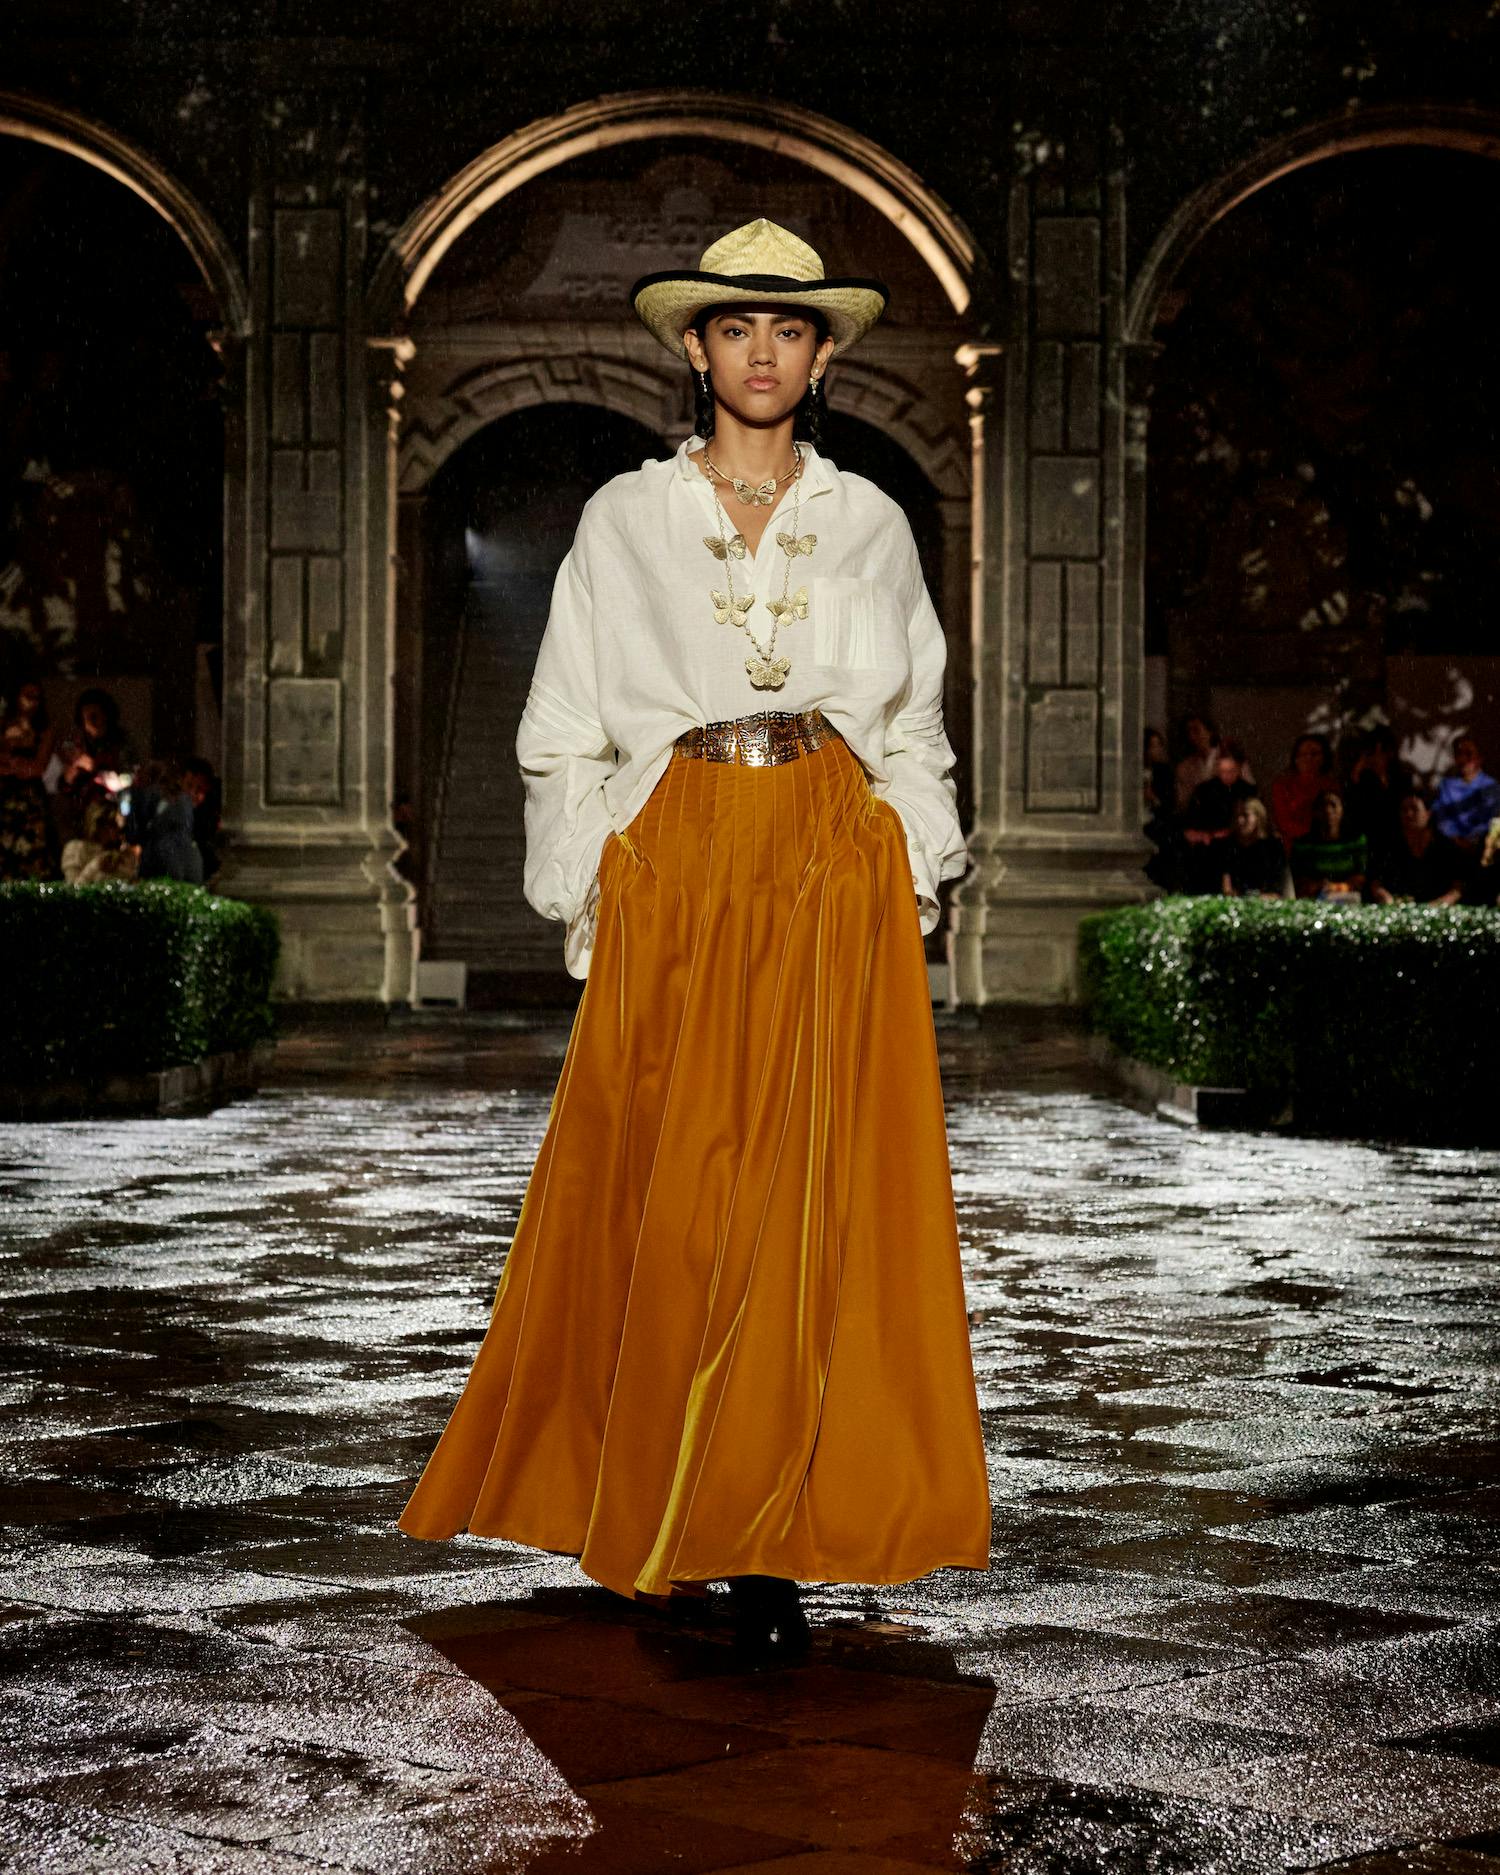 New Ralph Lauren collection honors 'heritage and traditions' of